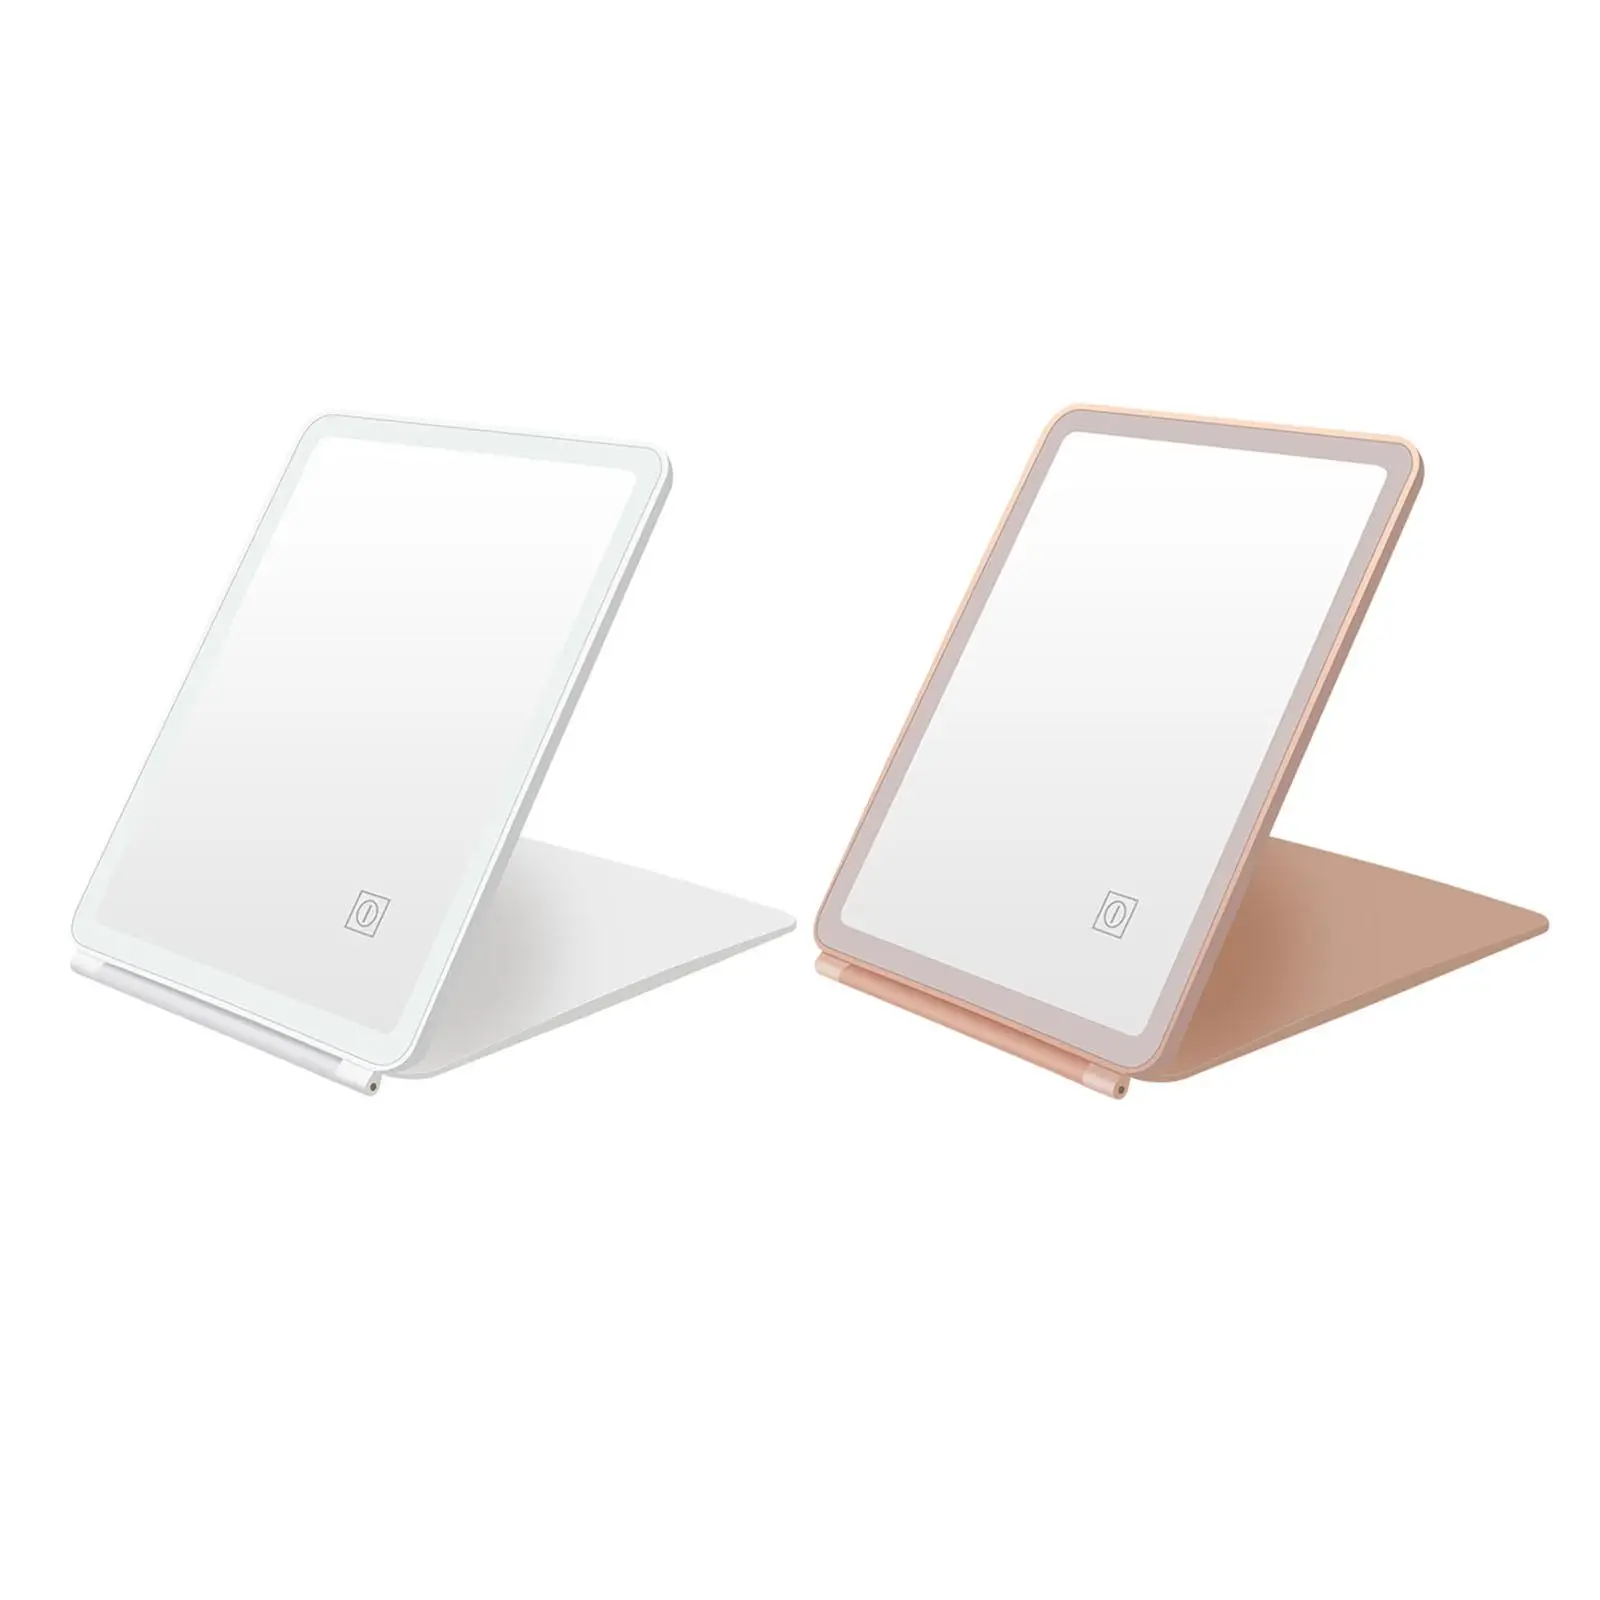 Folding LED Vanity Mirror Touch Screen 120 Adjustable for Gift Women Makeup